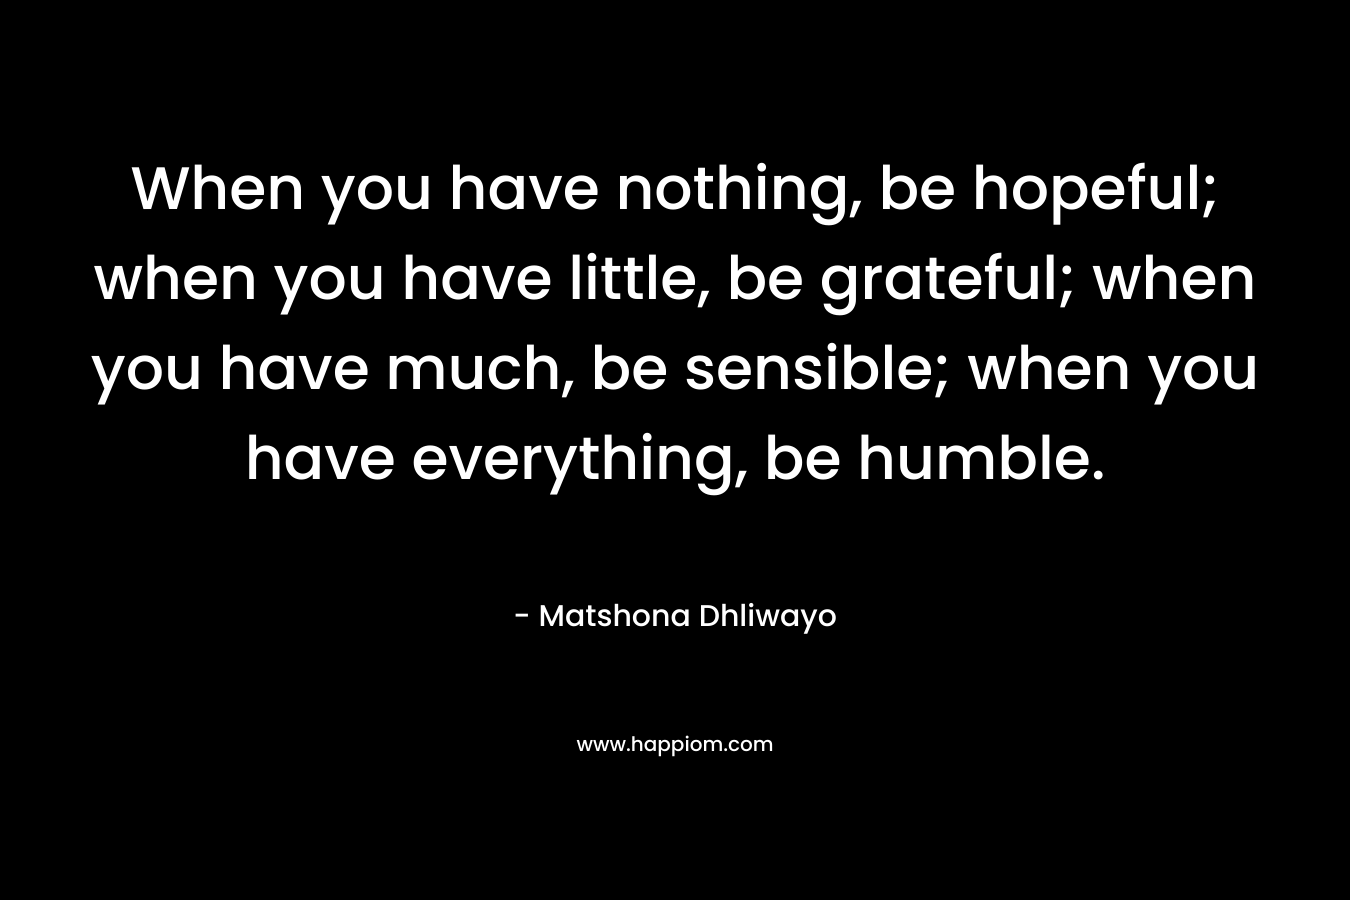 When you have nothing, be hopeful; when you have little, be grateful; when you have much, be sensible; when you have everything, be humble.